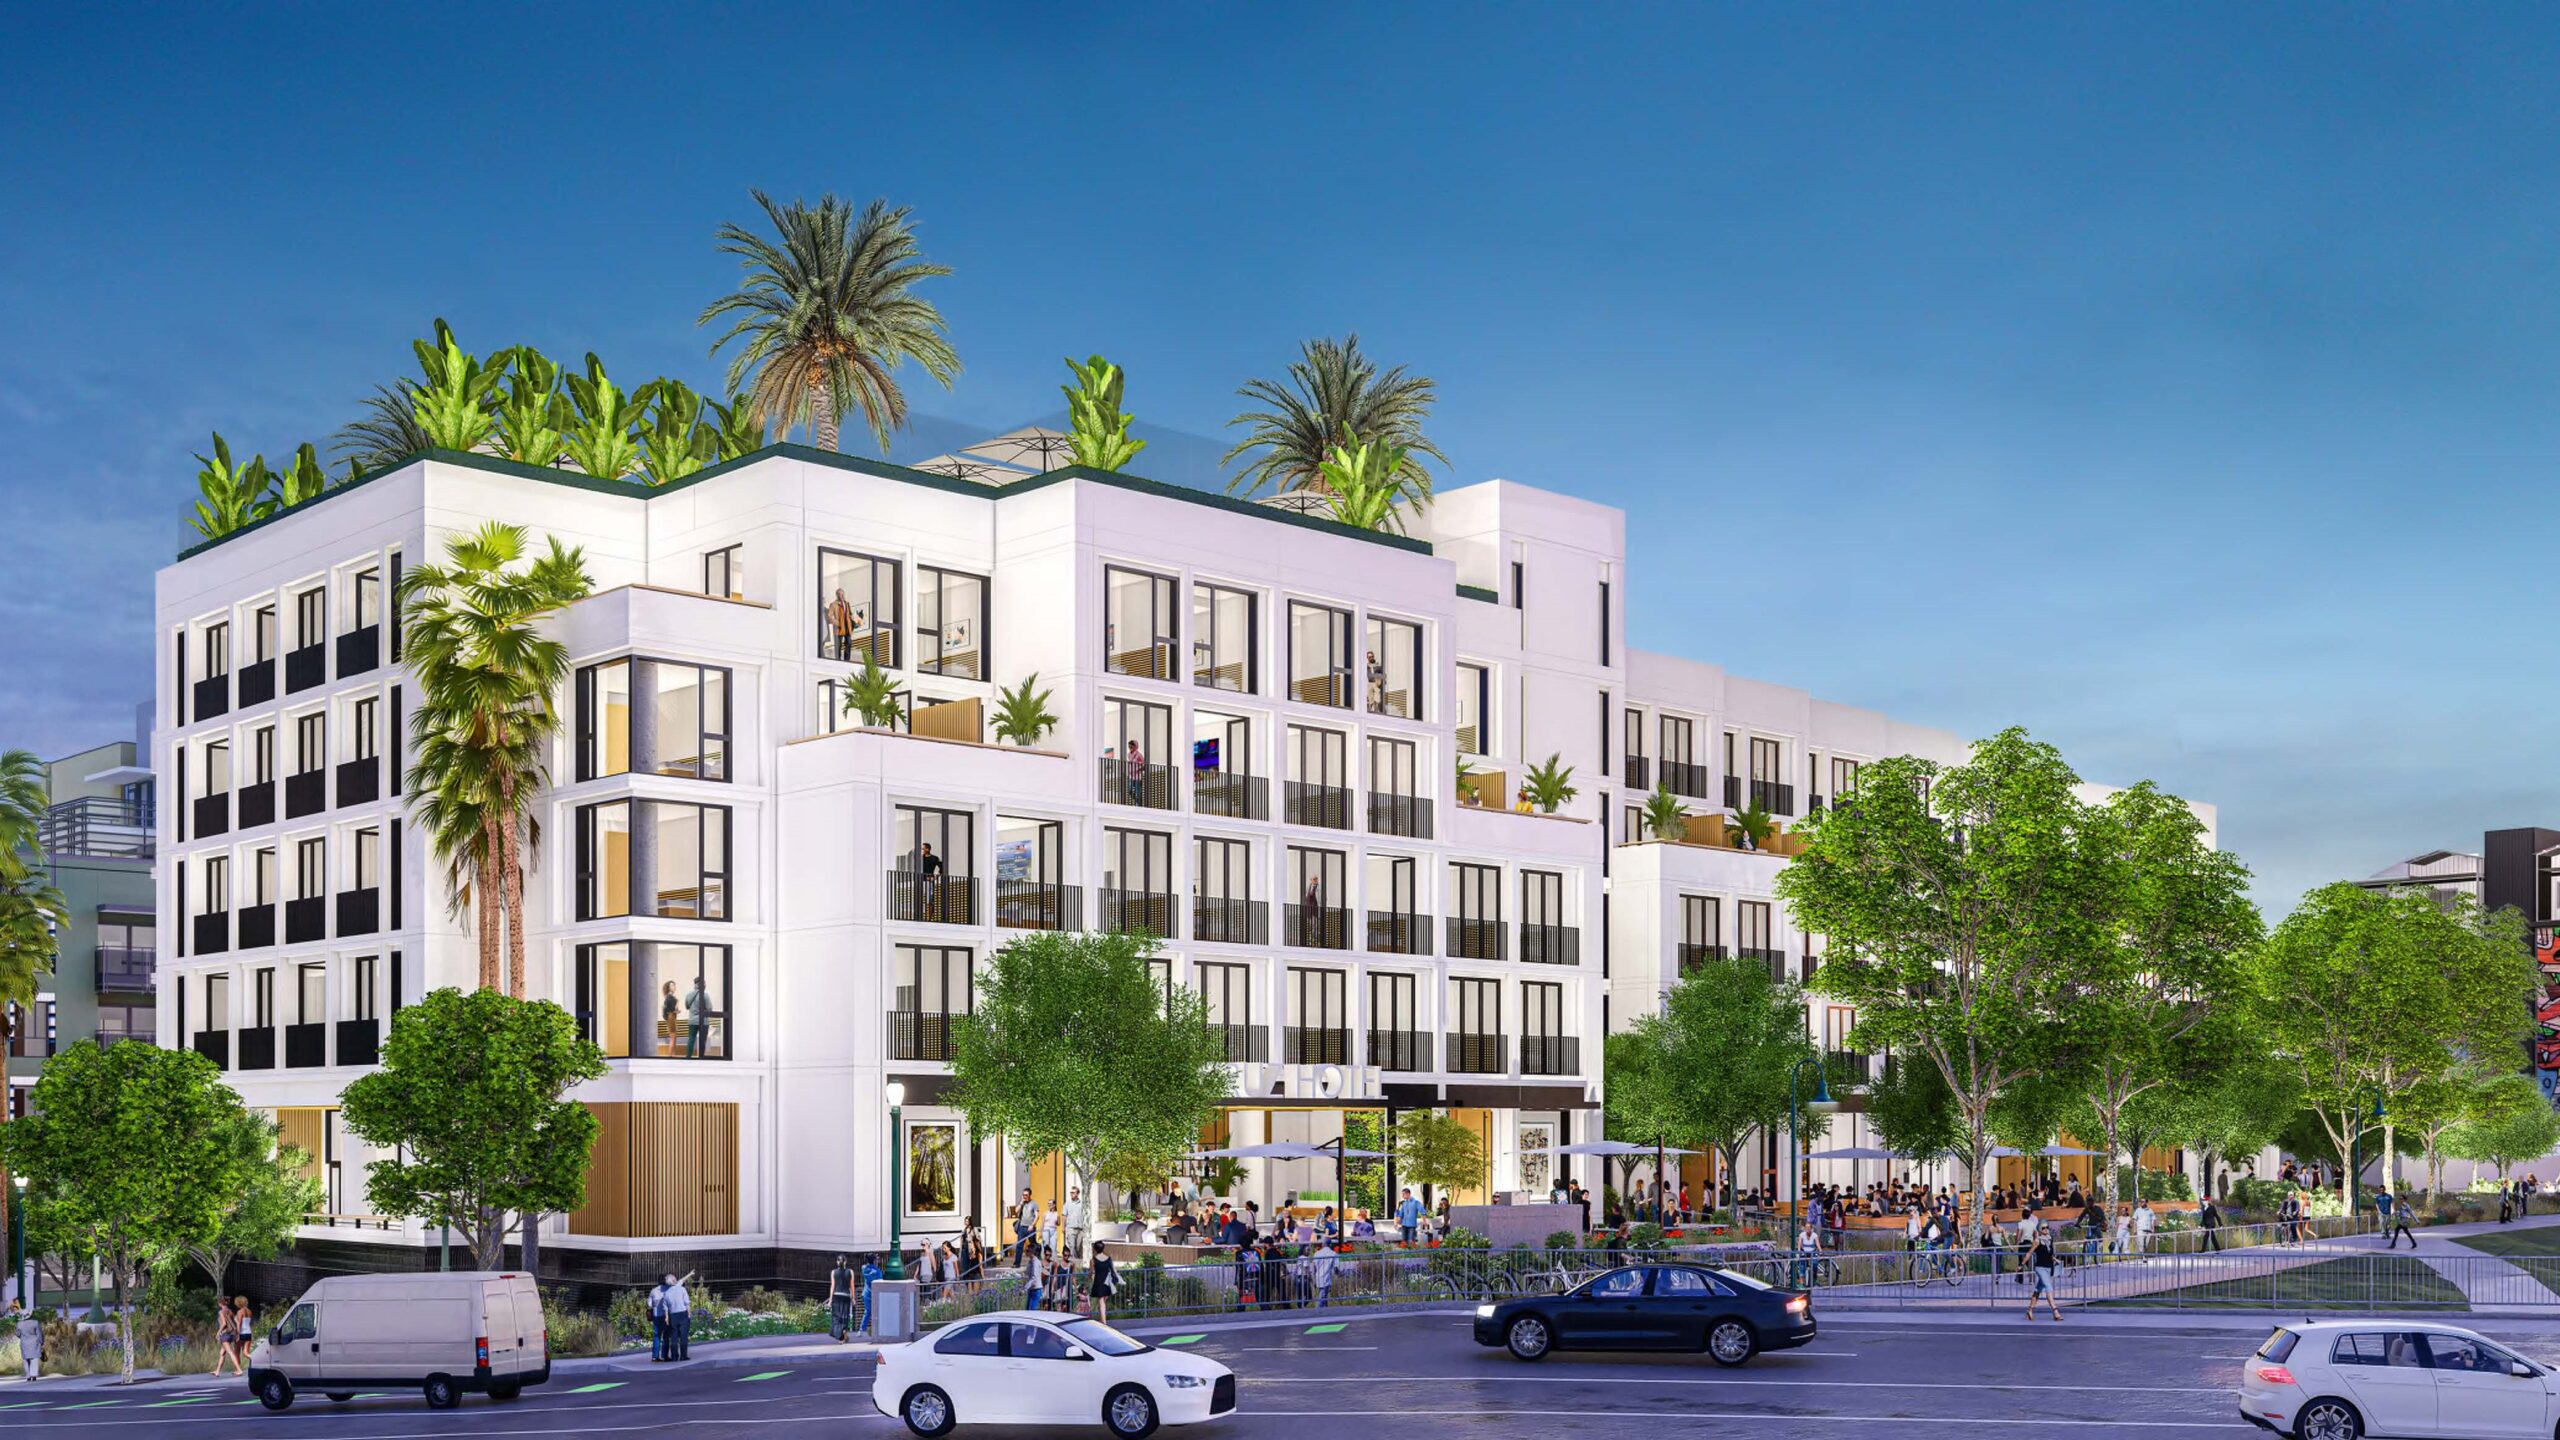 A rendering of the proposed Front Street hotel in Downtown Santa Cruz.